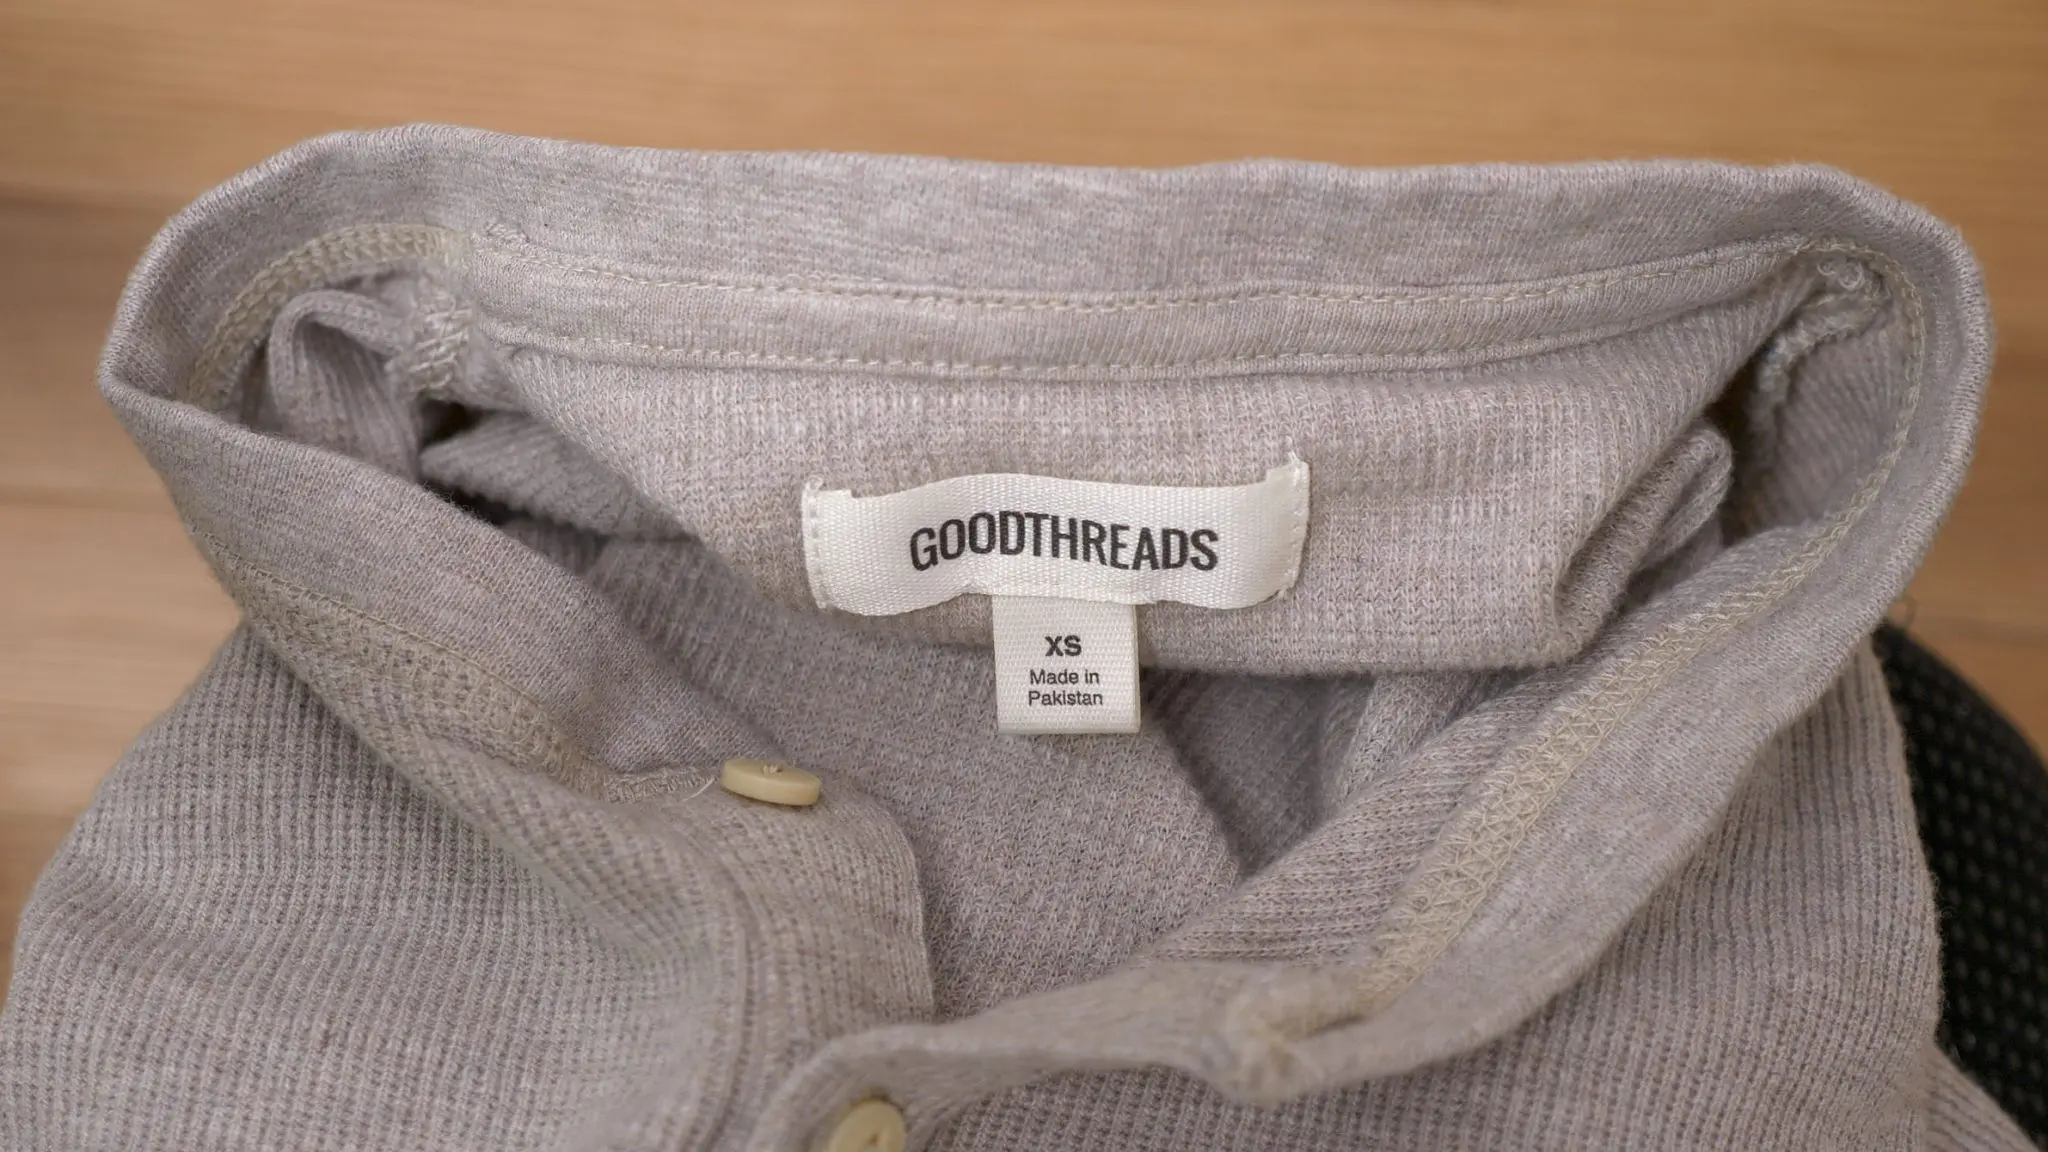 Amazon Goodthreads Review: Fit, Quality, Aesthetic & Value